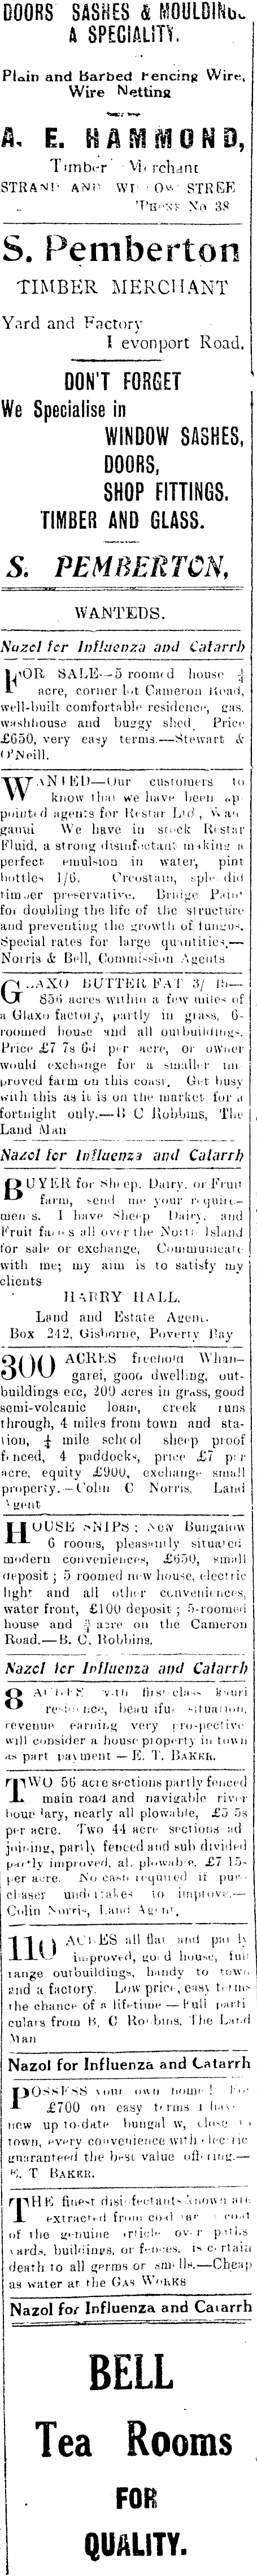 Papers Past Newspapers Bay Of Plenty Times 3 January 1919 Page 1 Advertisements Column 7